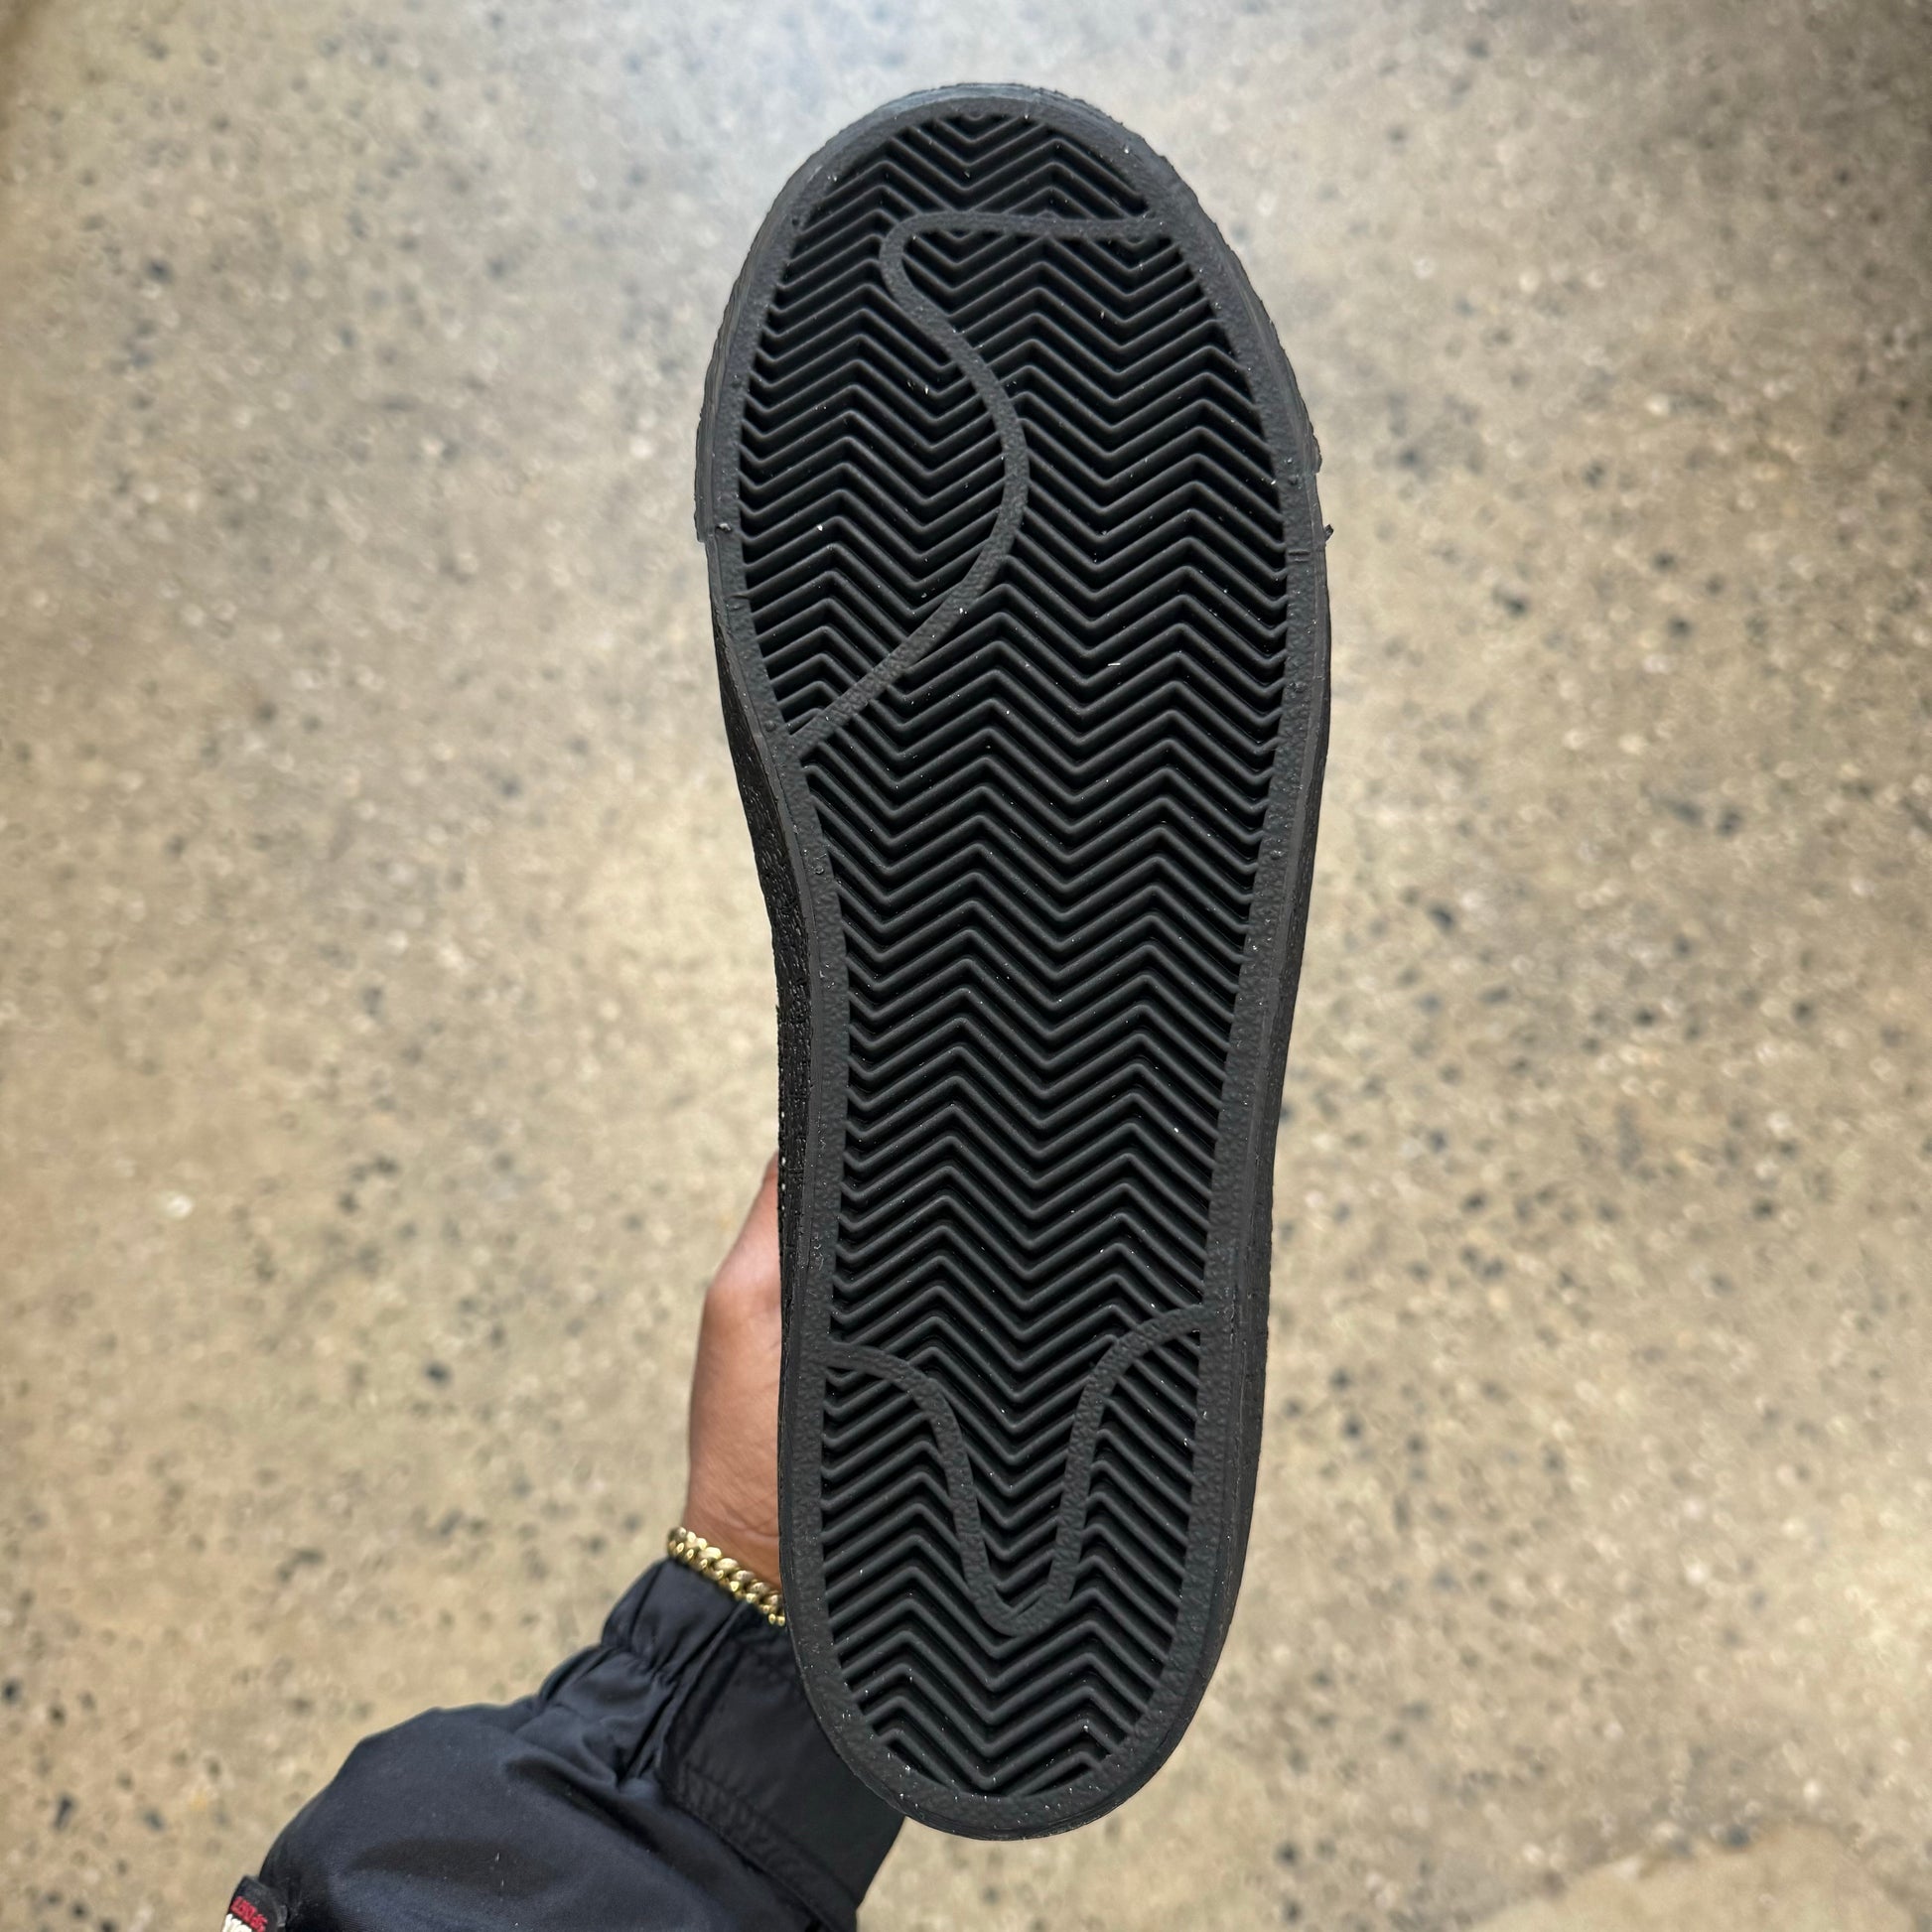 view of black gum rubber outsole of shoe